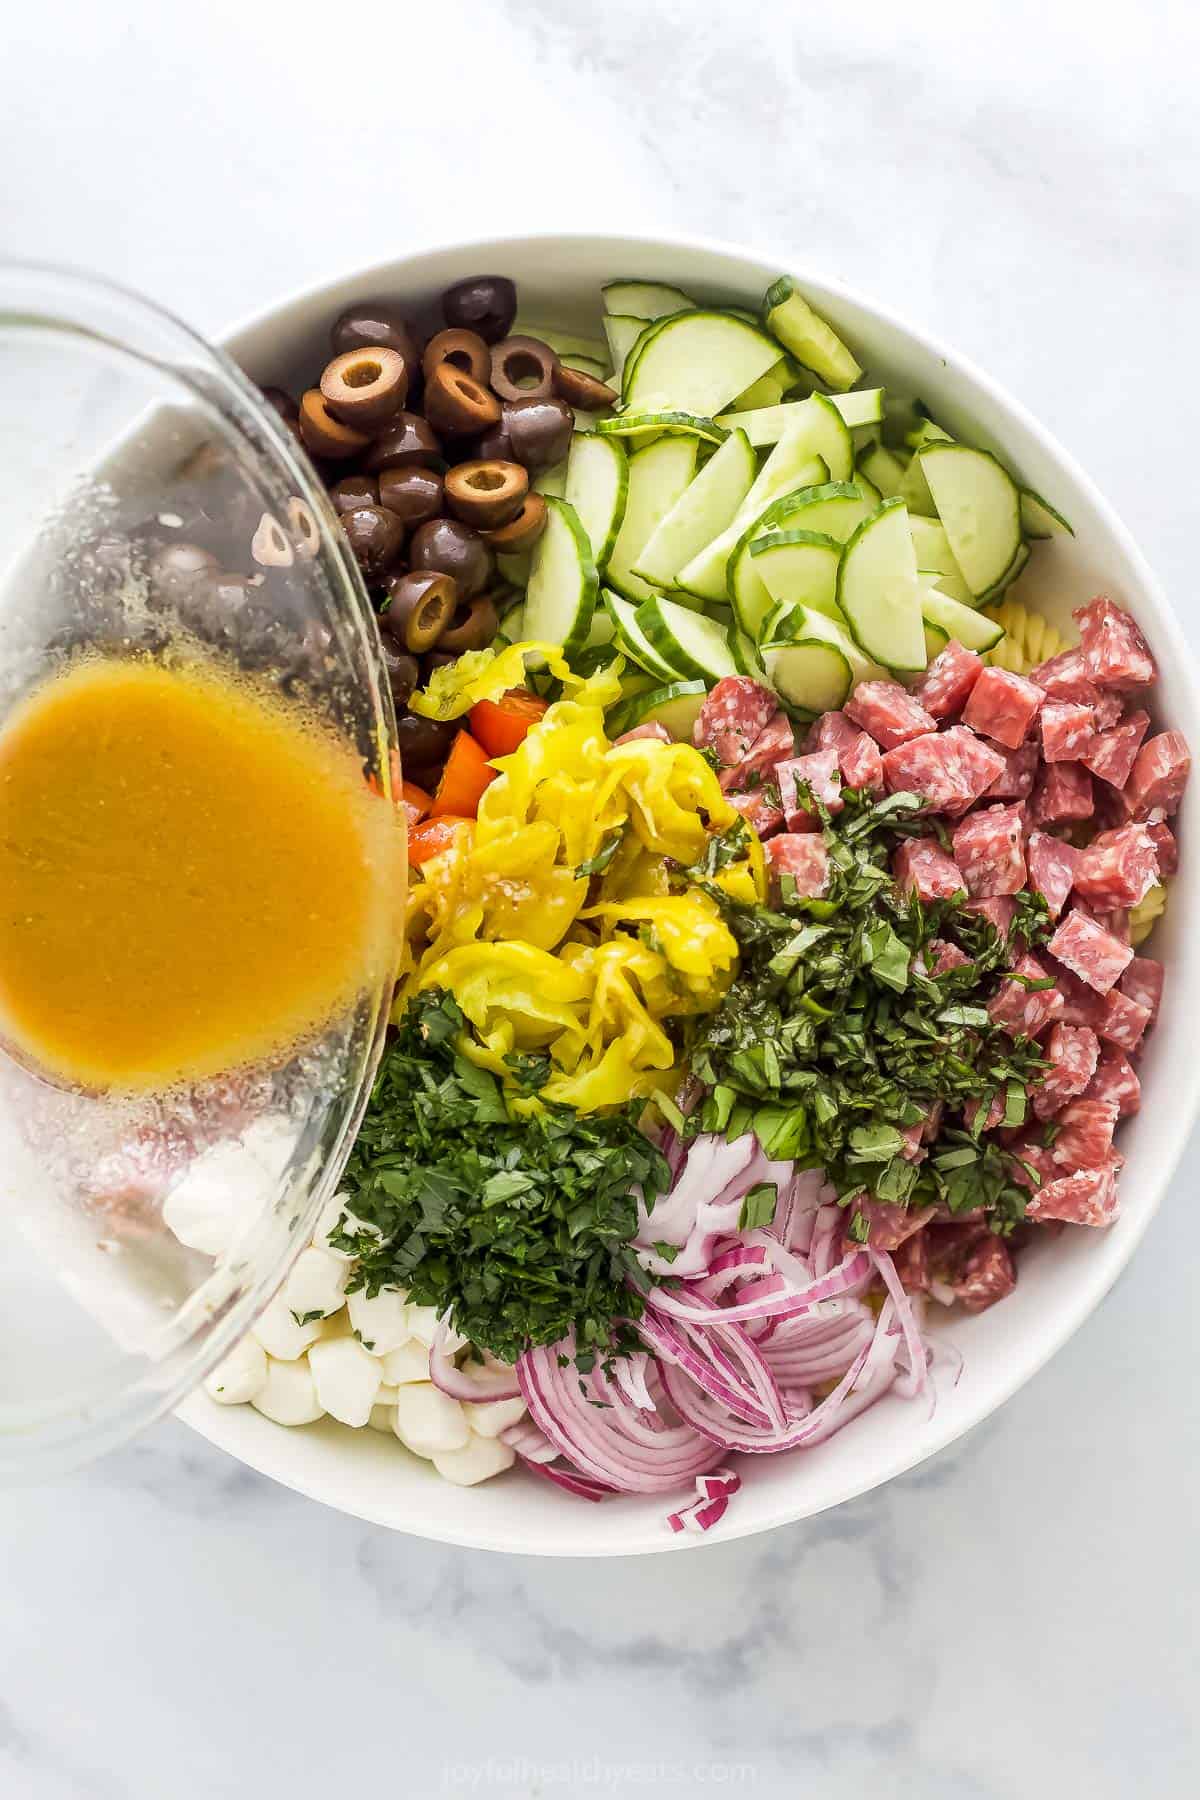 Italian vinaigrette dressing being poured over a bowl of veggies, herbs, salami, cheese and pasta